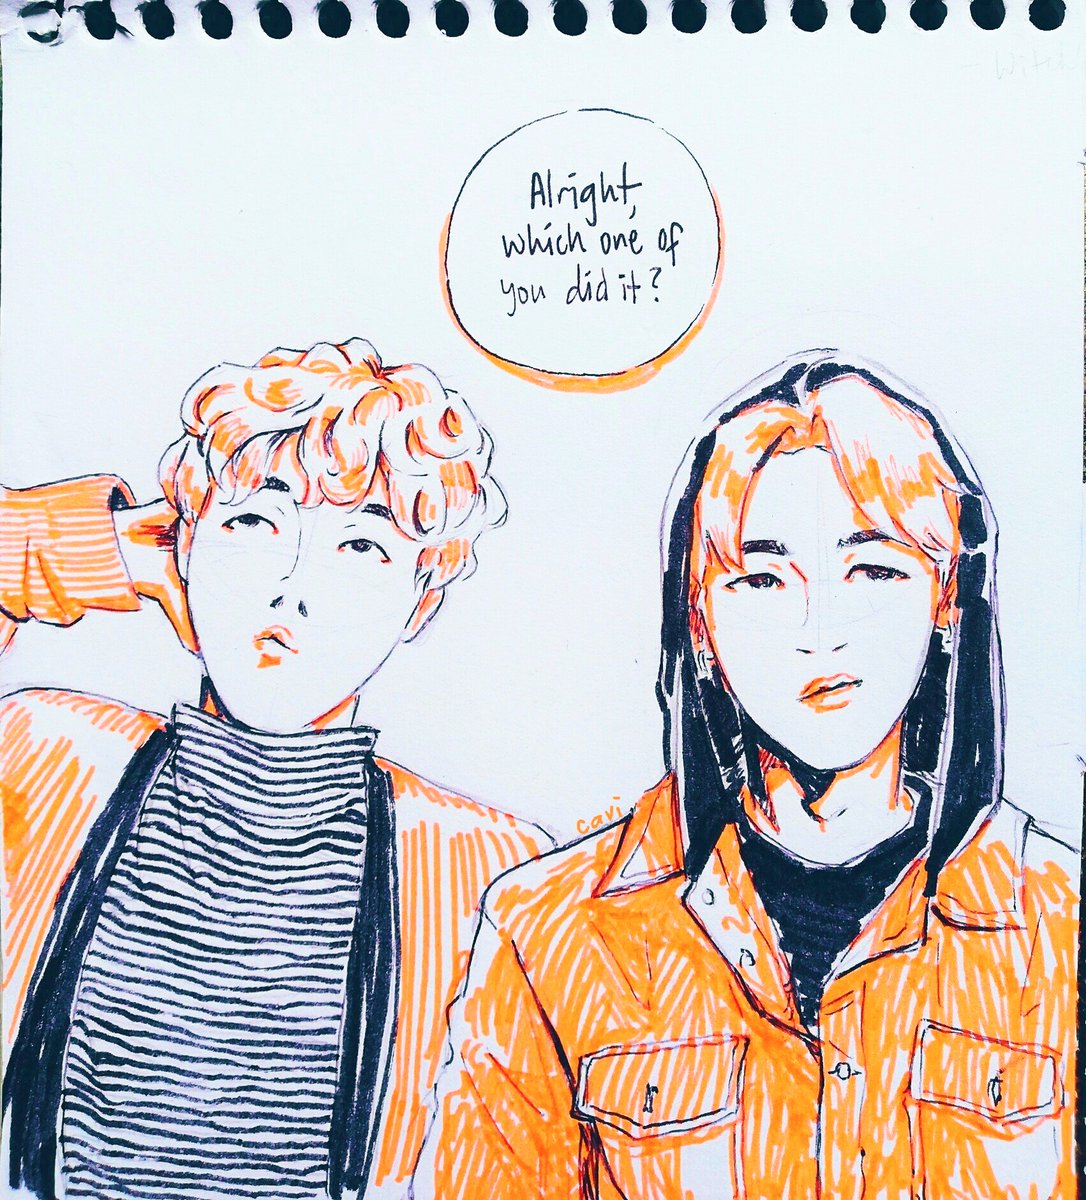 insolent rich kids vibes jihope ☀️☀️

a redraw of an old one from 2018 